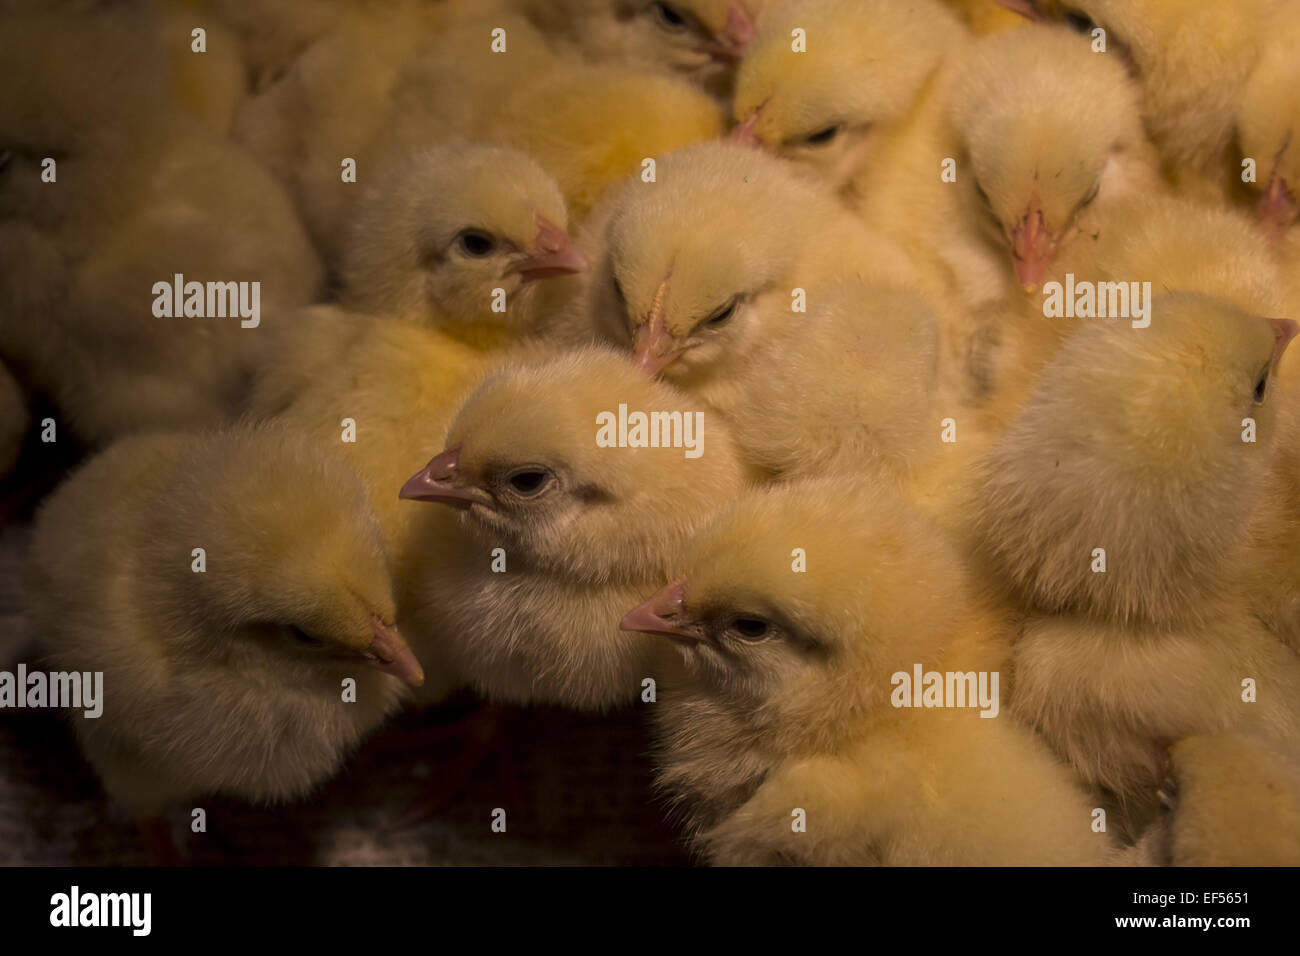 Jan. 27, 2015 - Jorhat, Assam, India - Day old chicks seen at a poultry  farm on the outskirts in Jorhat district in northeastern Assam state on  January 27, 2015. Poultry activity